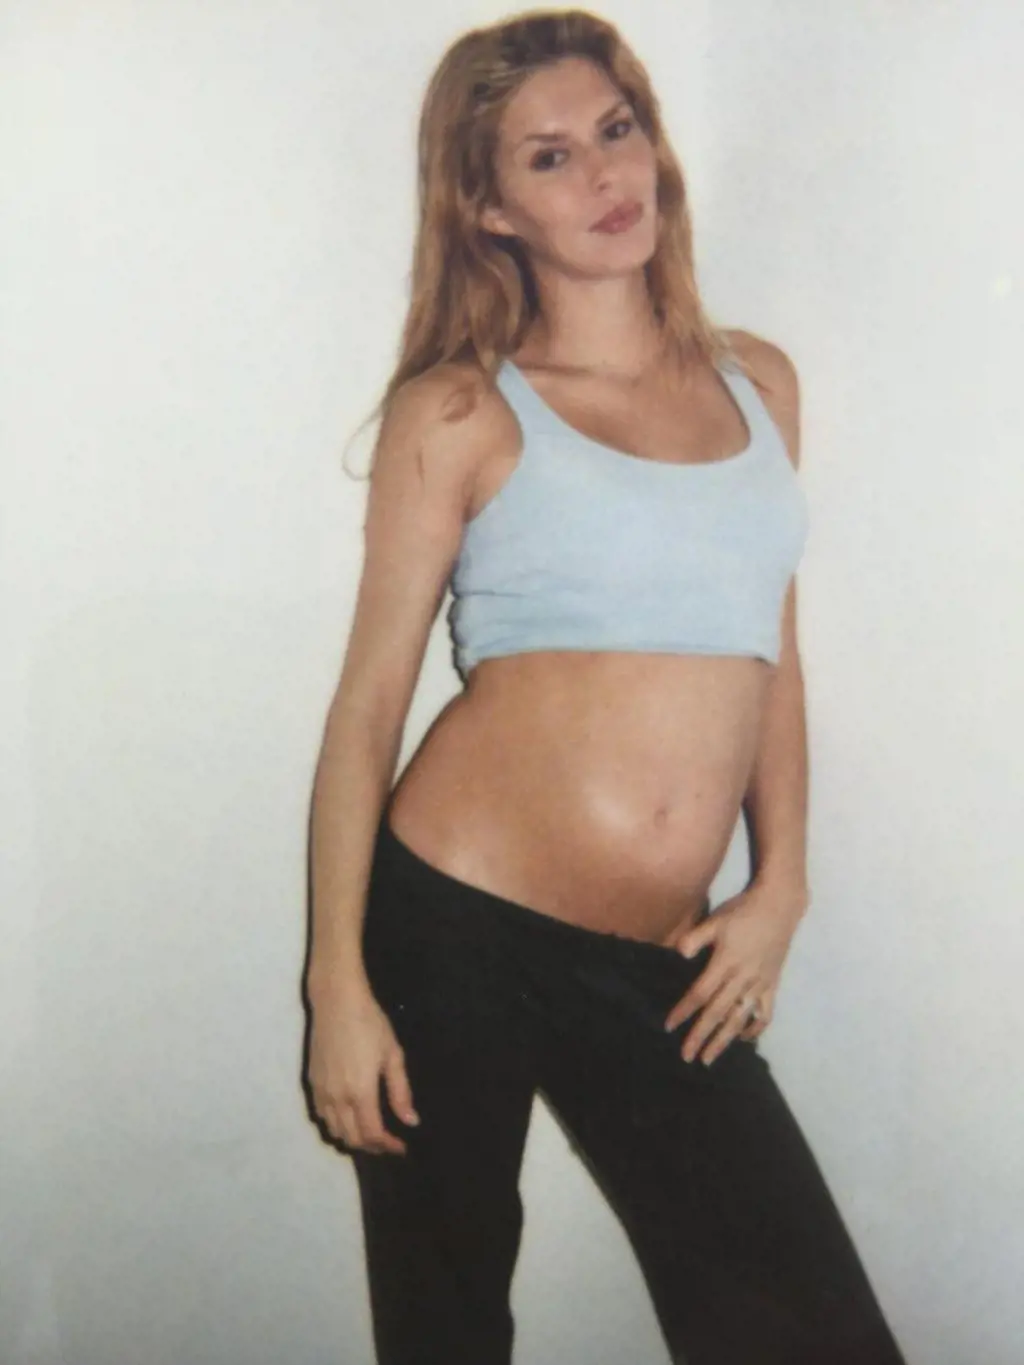 Brandi Glanville posing with her baby bump during her first pregnancy.